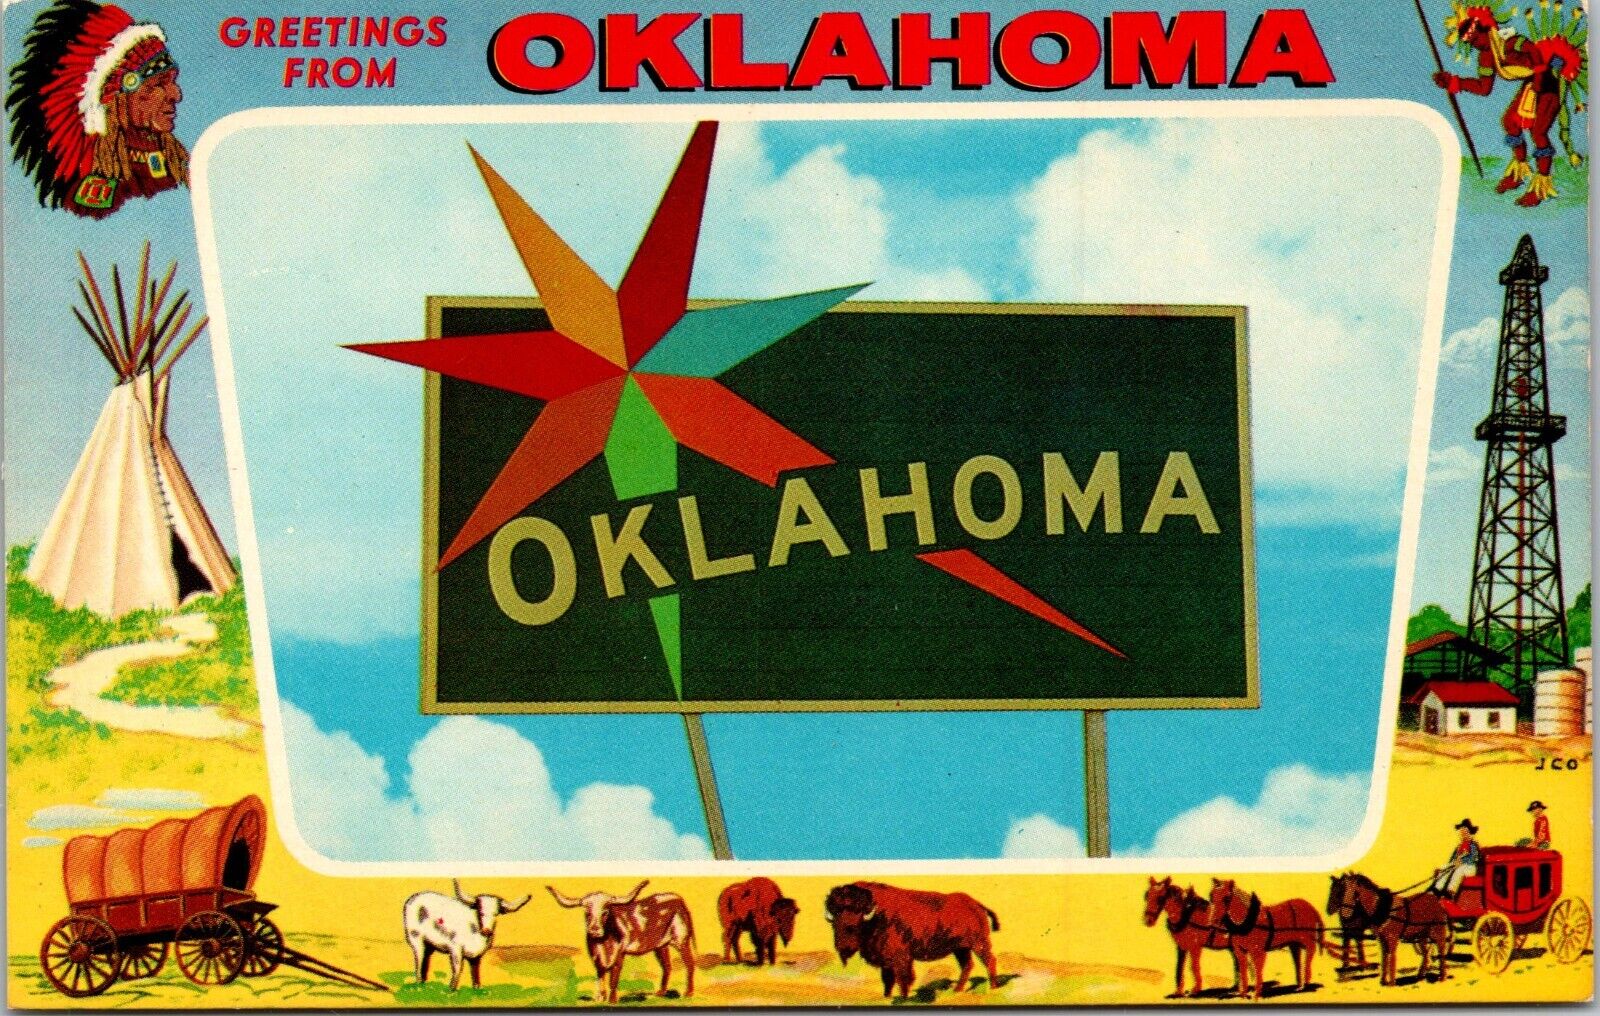 Greetings From Oklahoma Postcard With Indians, Buffalo, Stagecoach & Horses